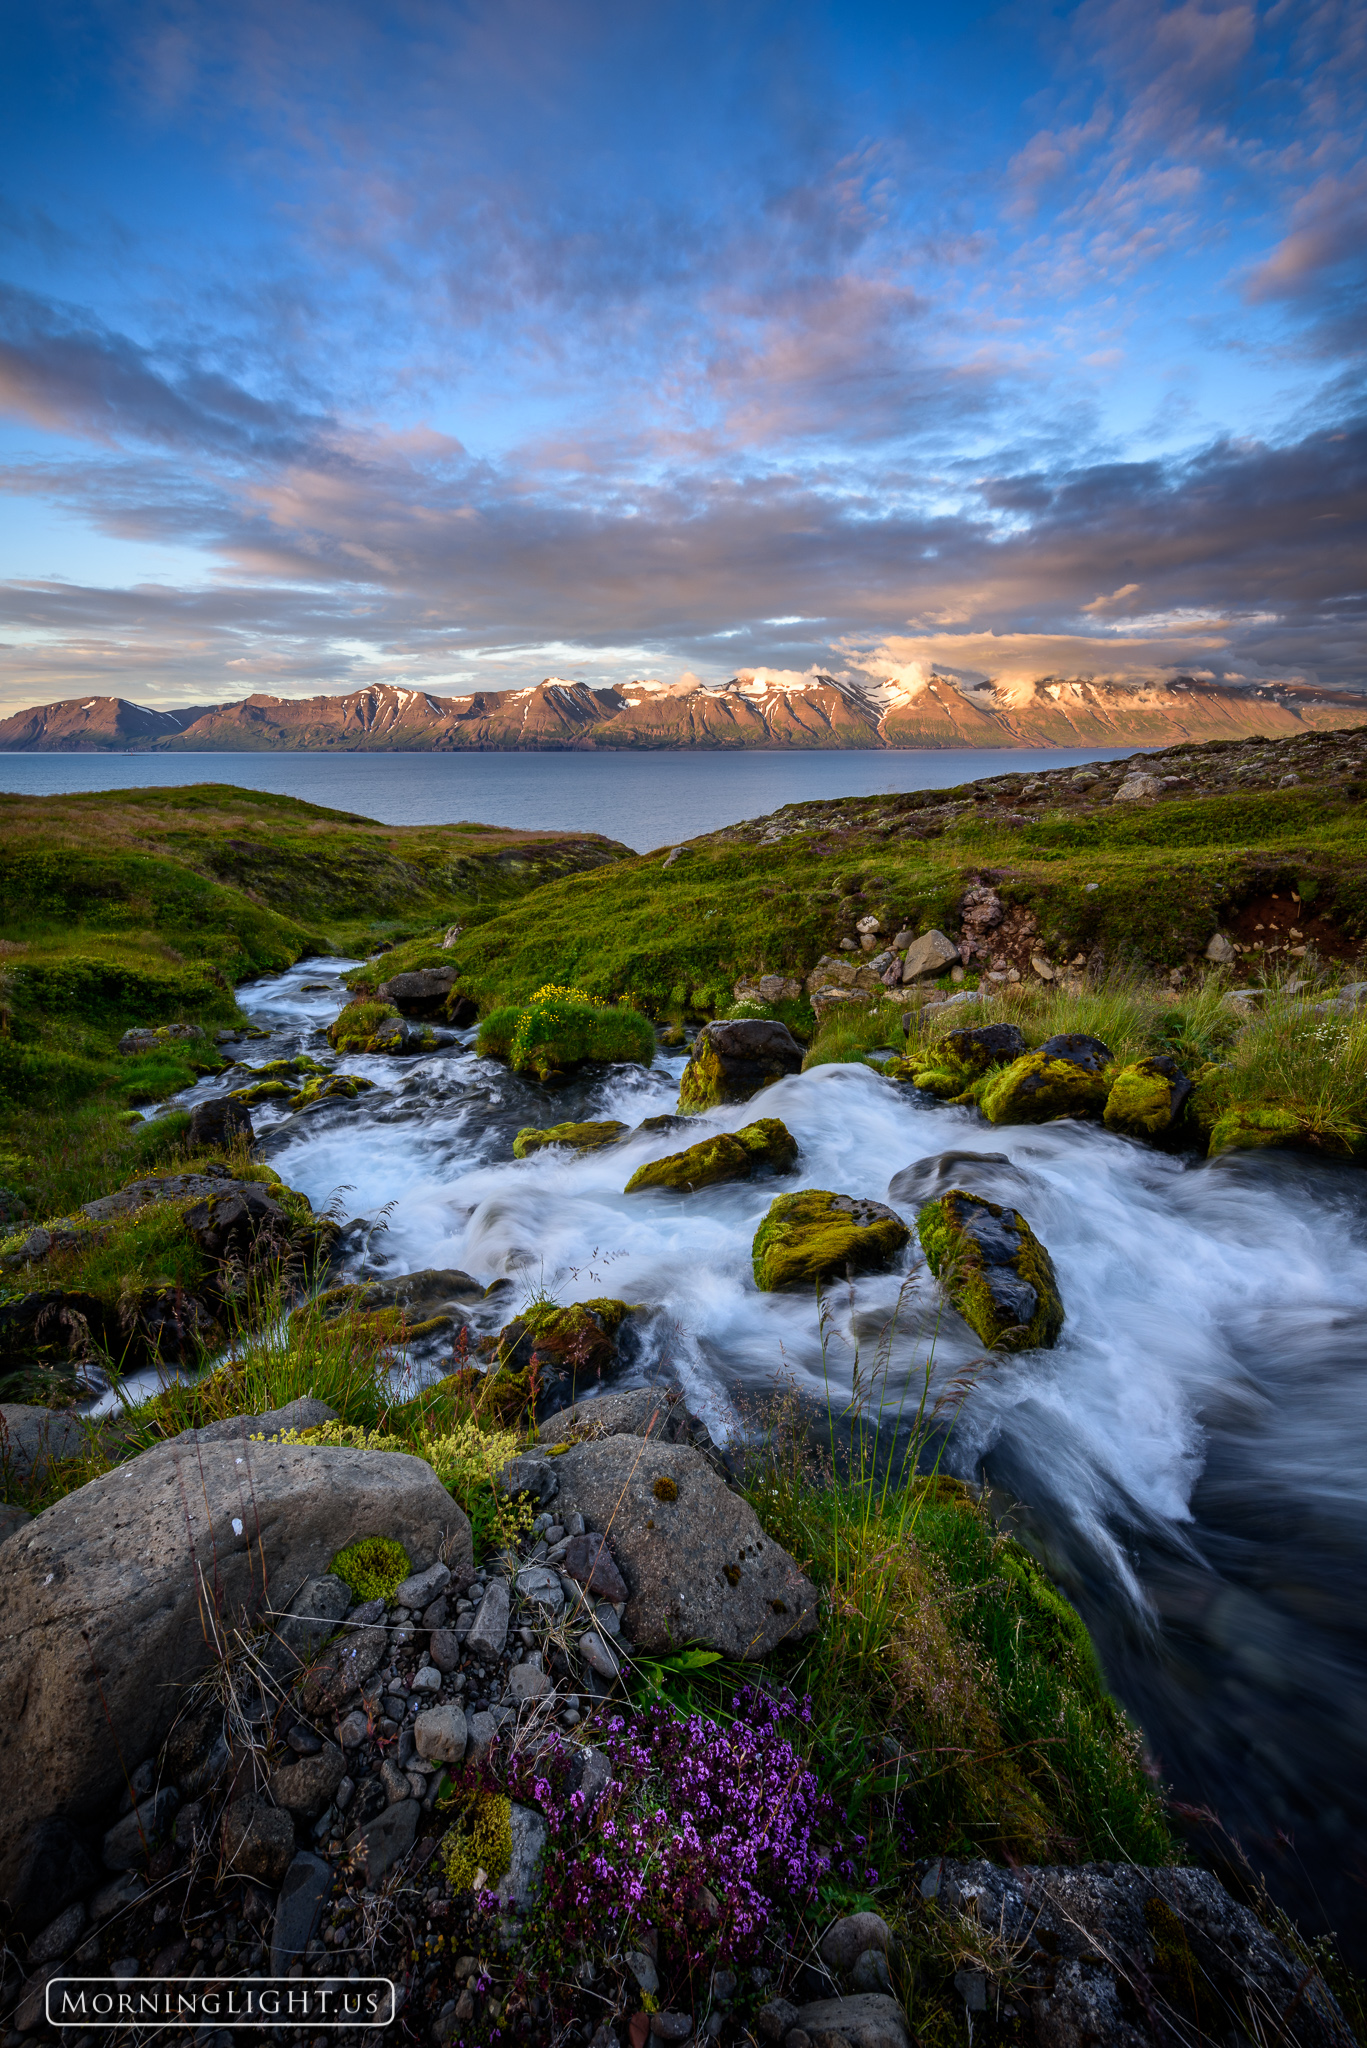 A rushing stream makes its way down the lush slope and into the arctic sea.